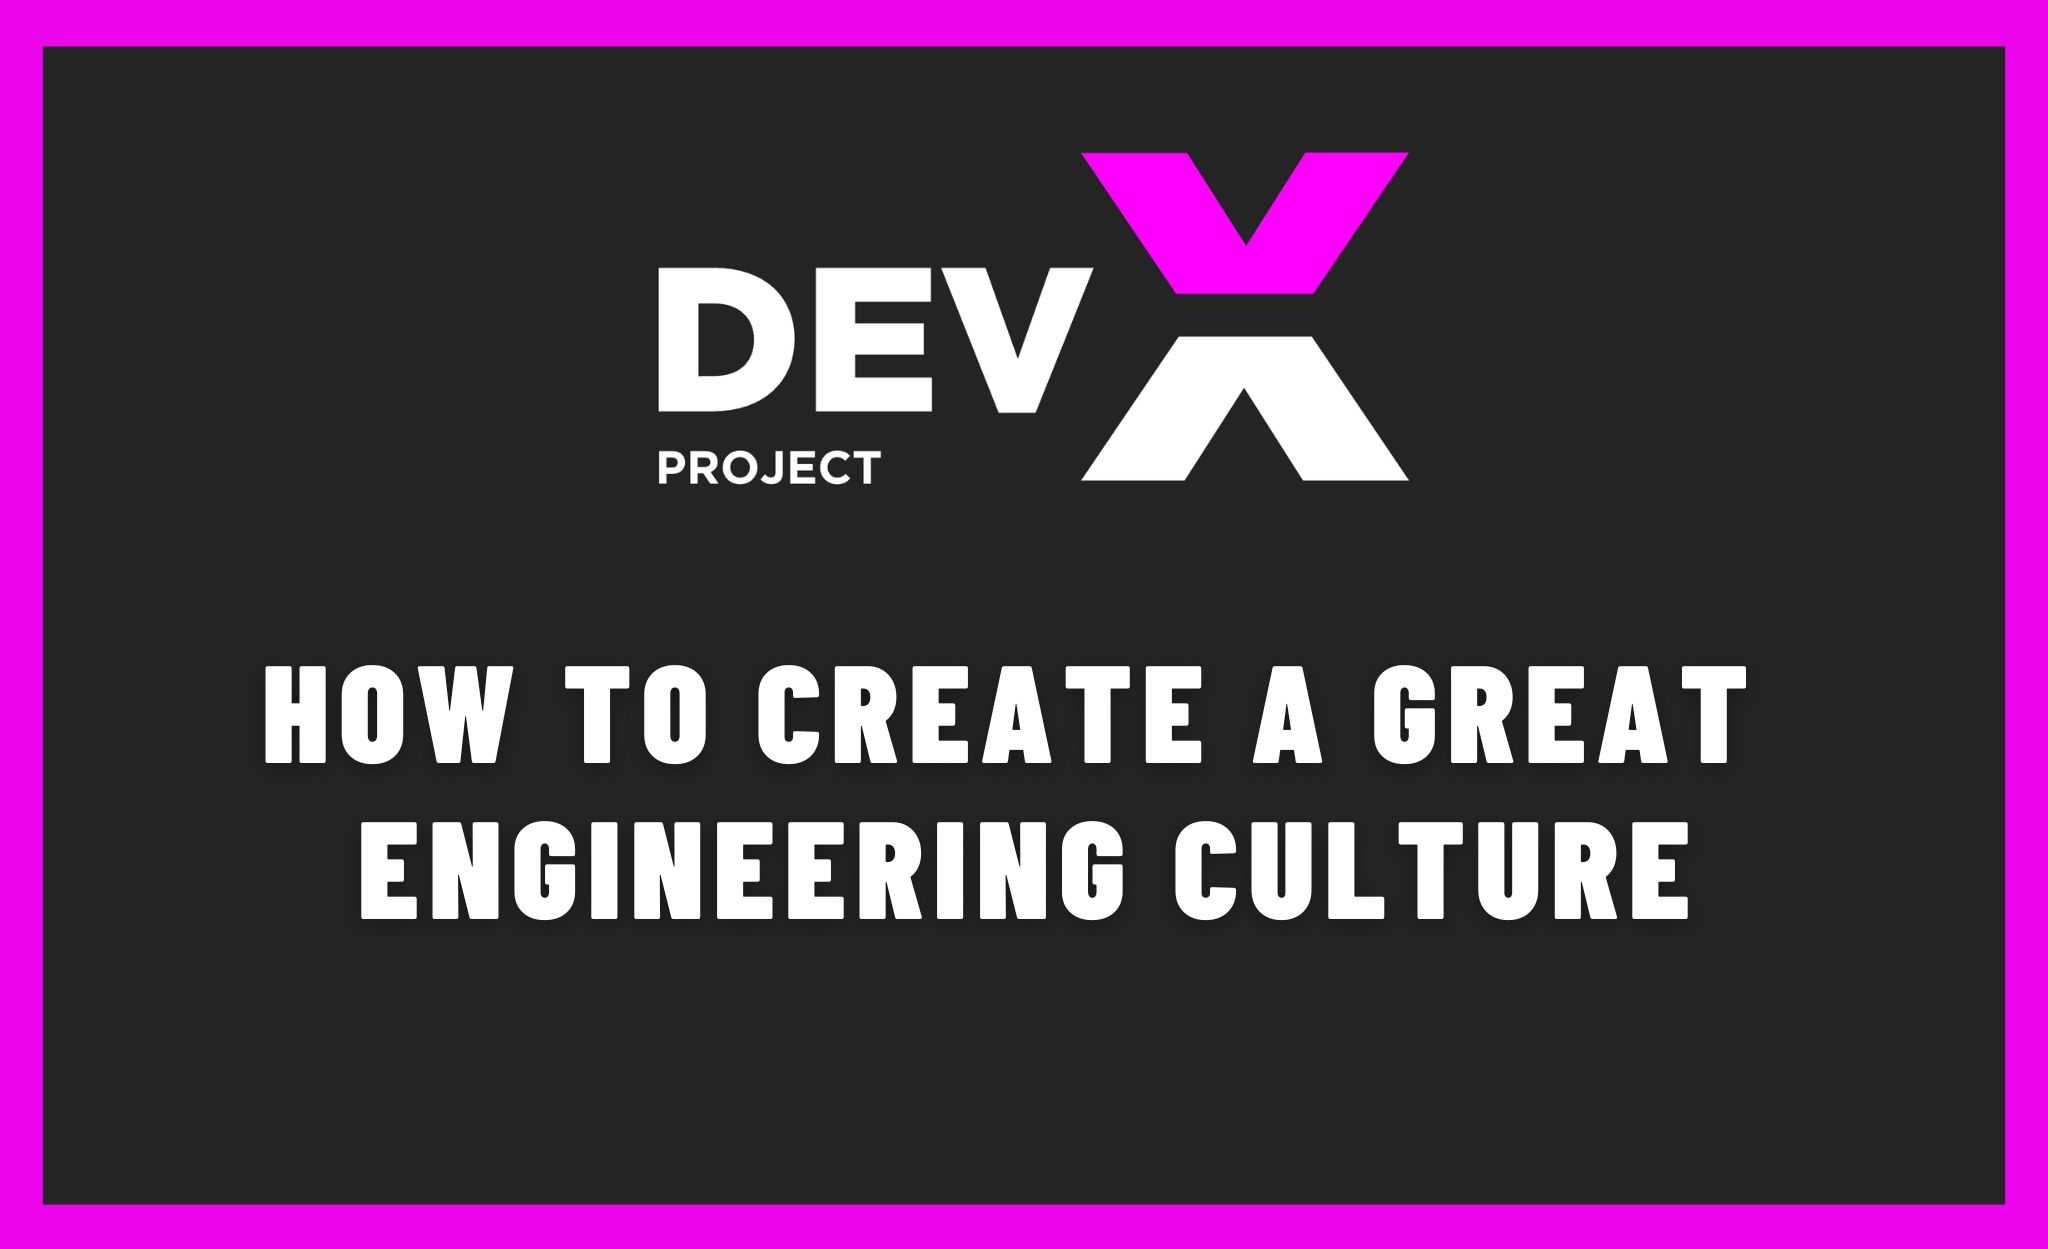 How to create a great engineering culture